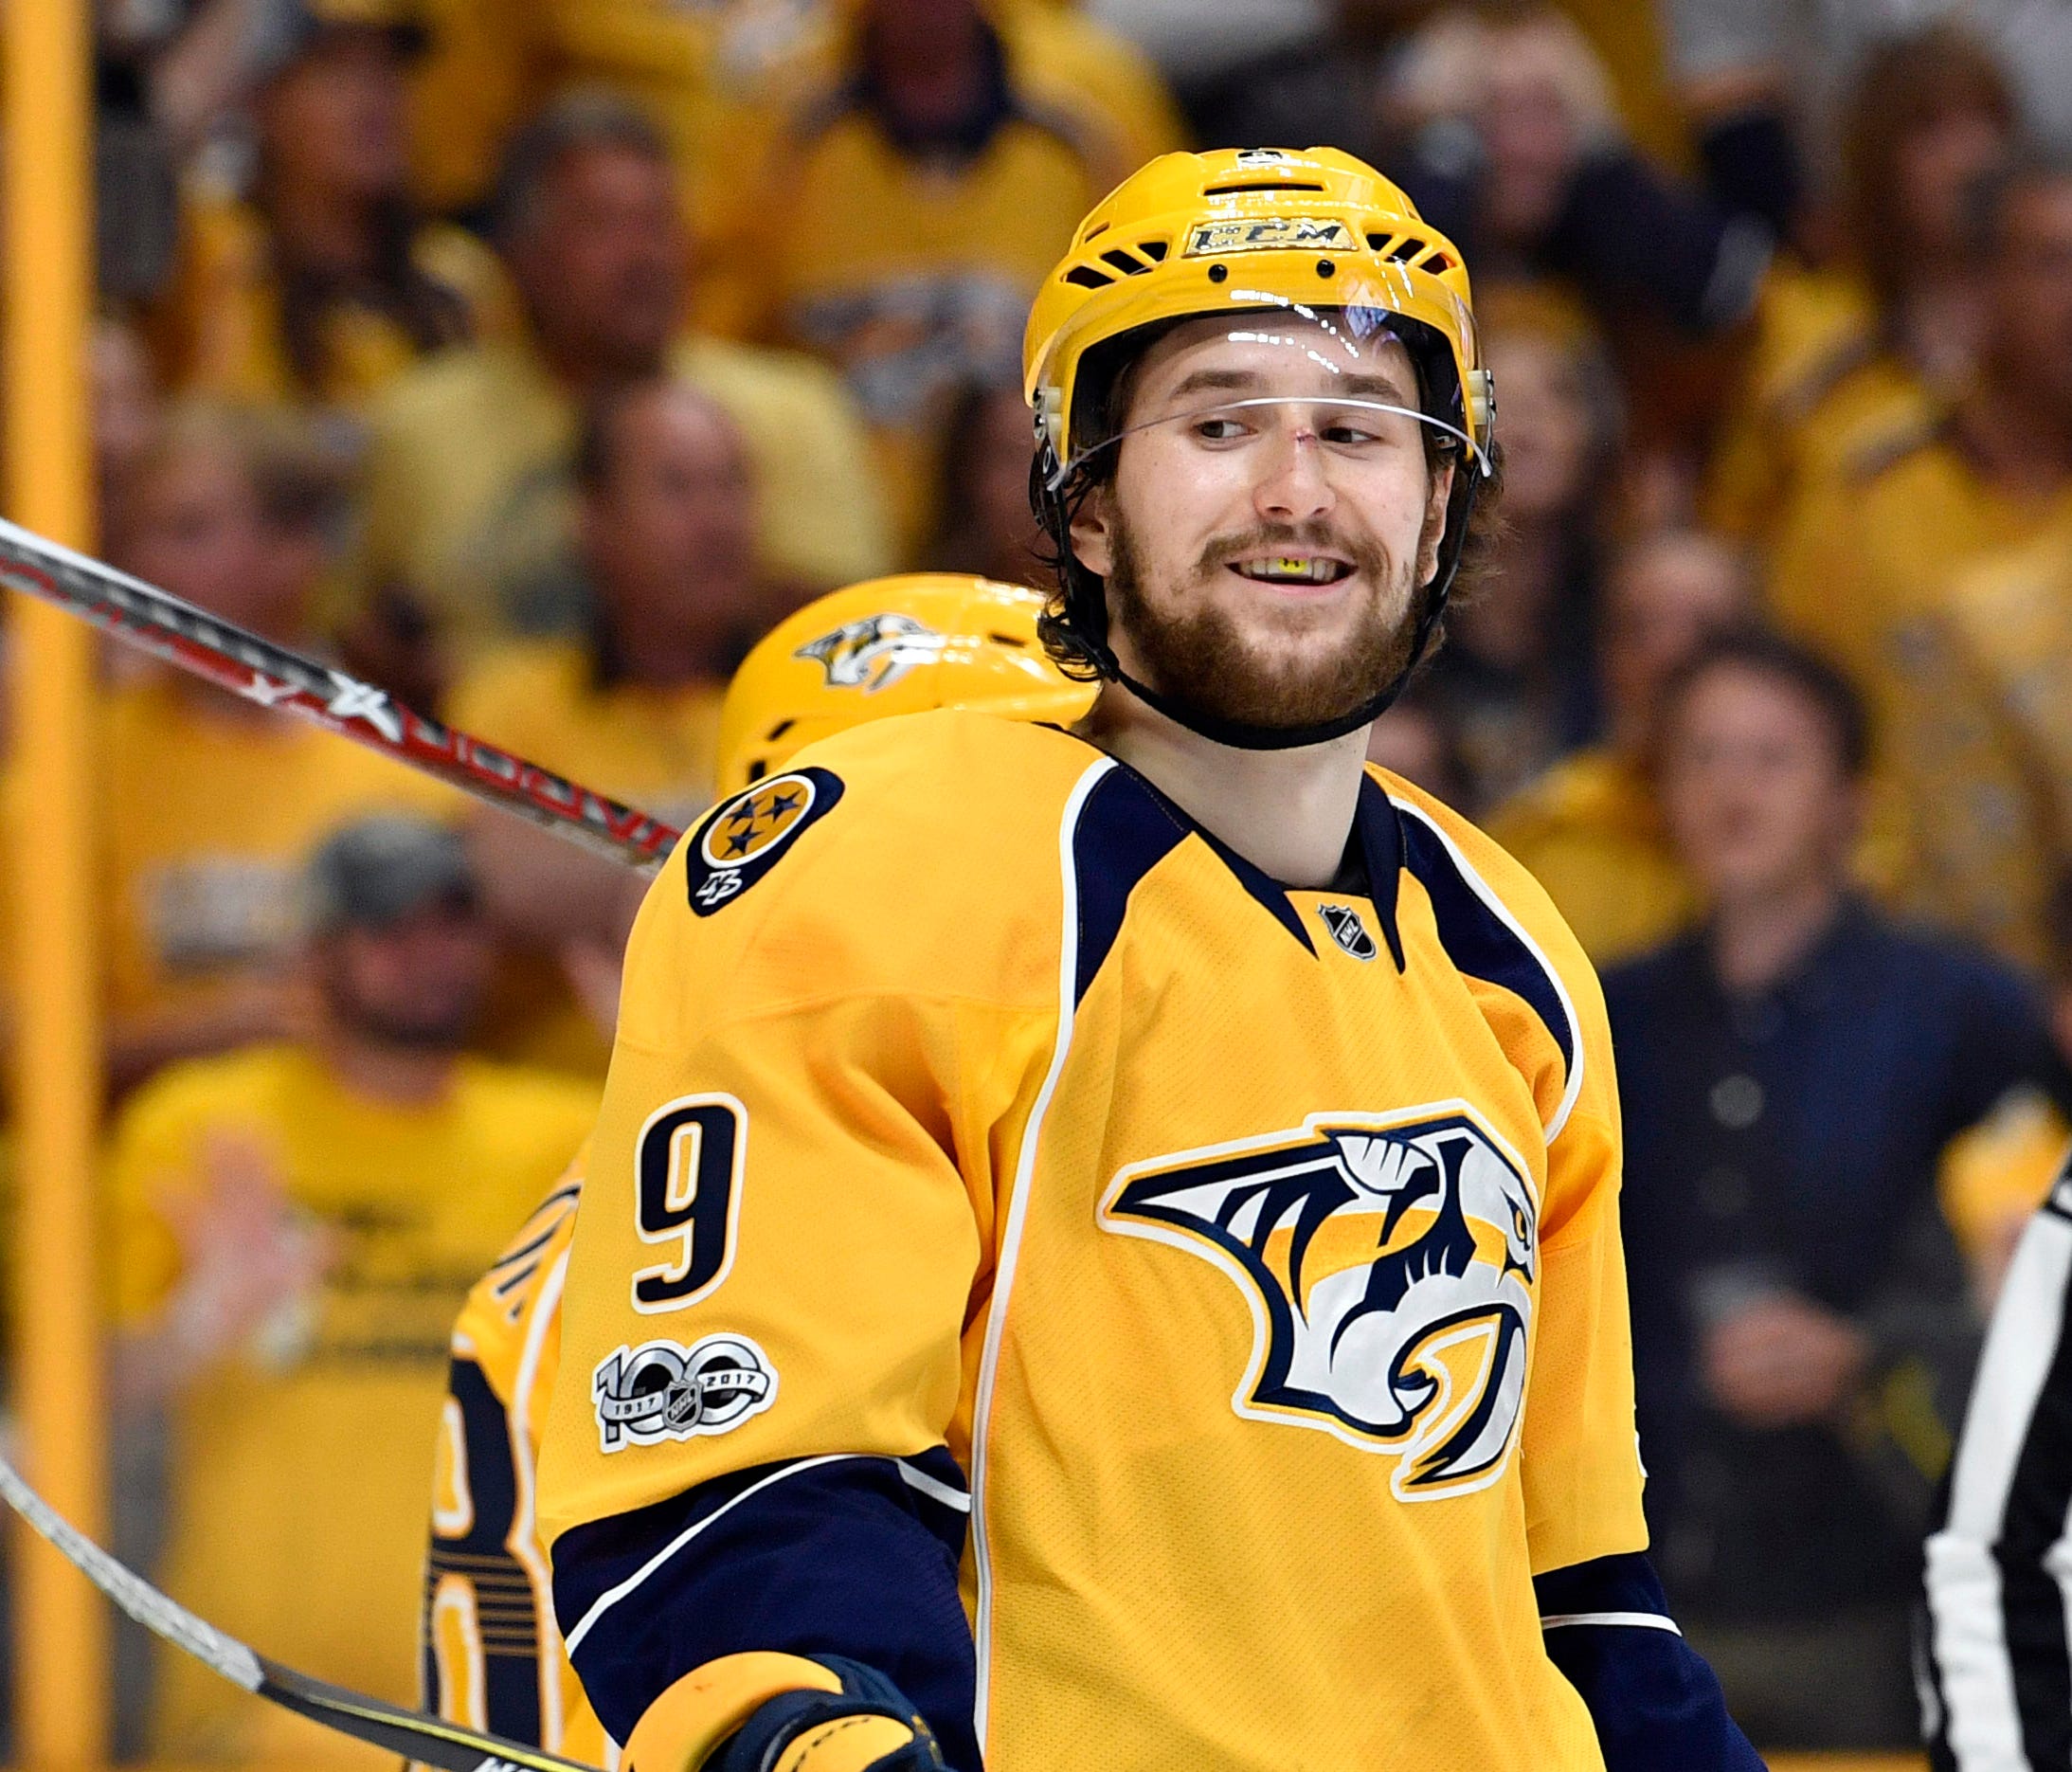 Nashville Predators left wing Filip Forsberg leads the team with 15 points in the playoffs.